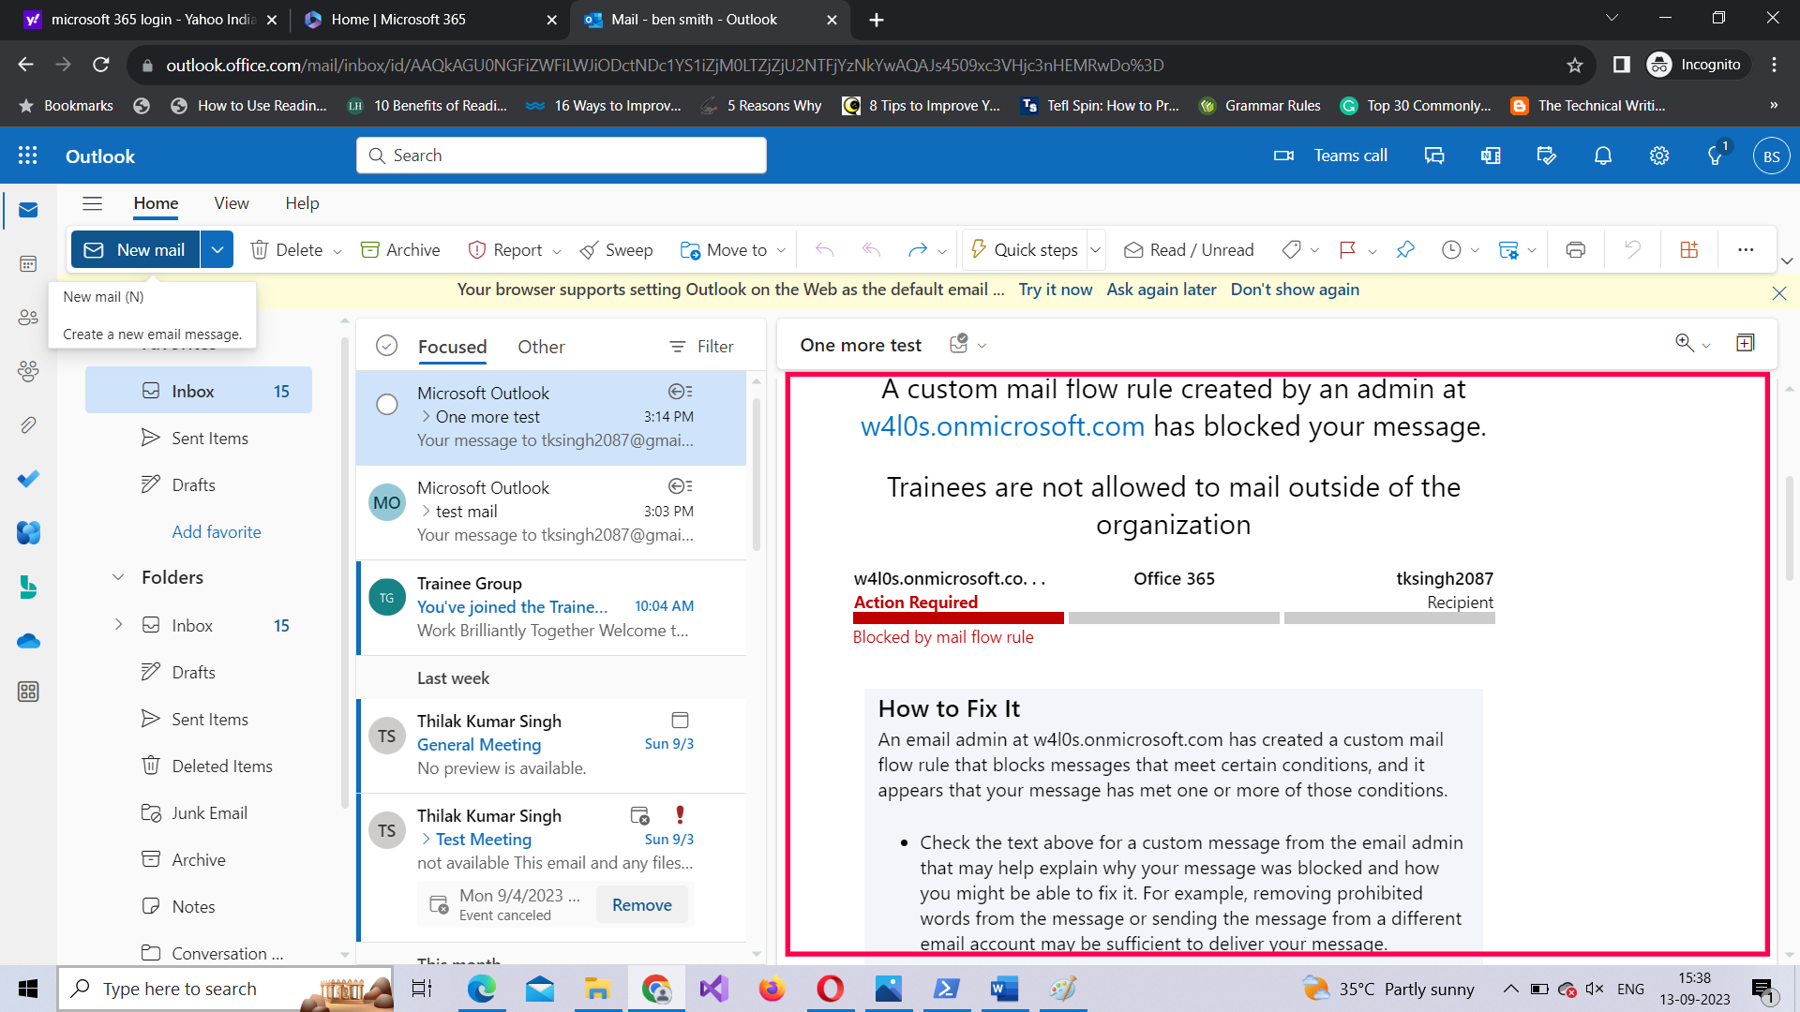 This screenshot shows how you can test the configured Microsoft 365 mail flow rule using the Outlook web app (OWA). It displays a notification that says “A custom mail flow rule created by an admin has blocked your message. Trainees are not allowed to mail outside of the organization” and tells how to fix the issue.